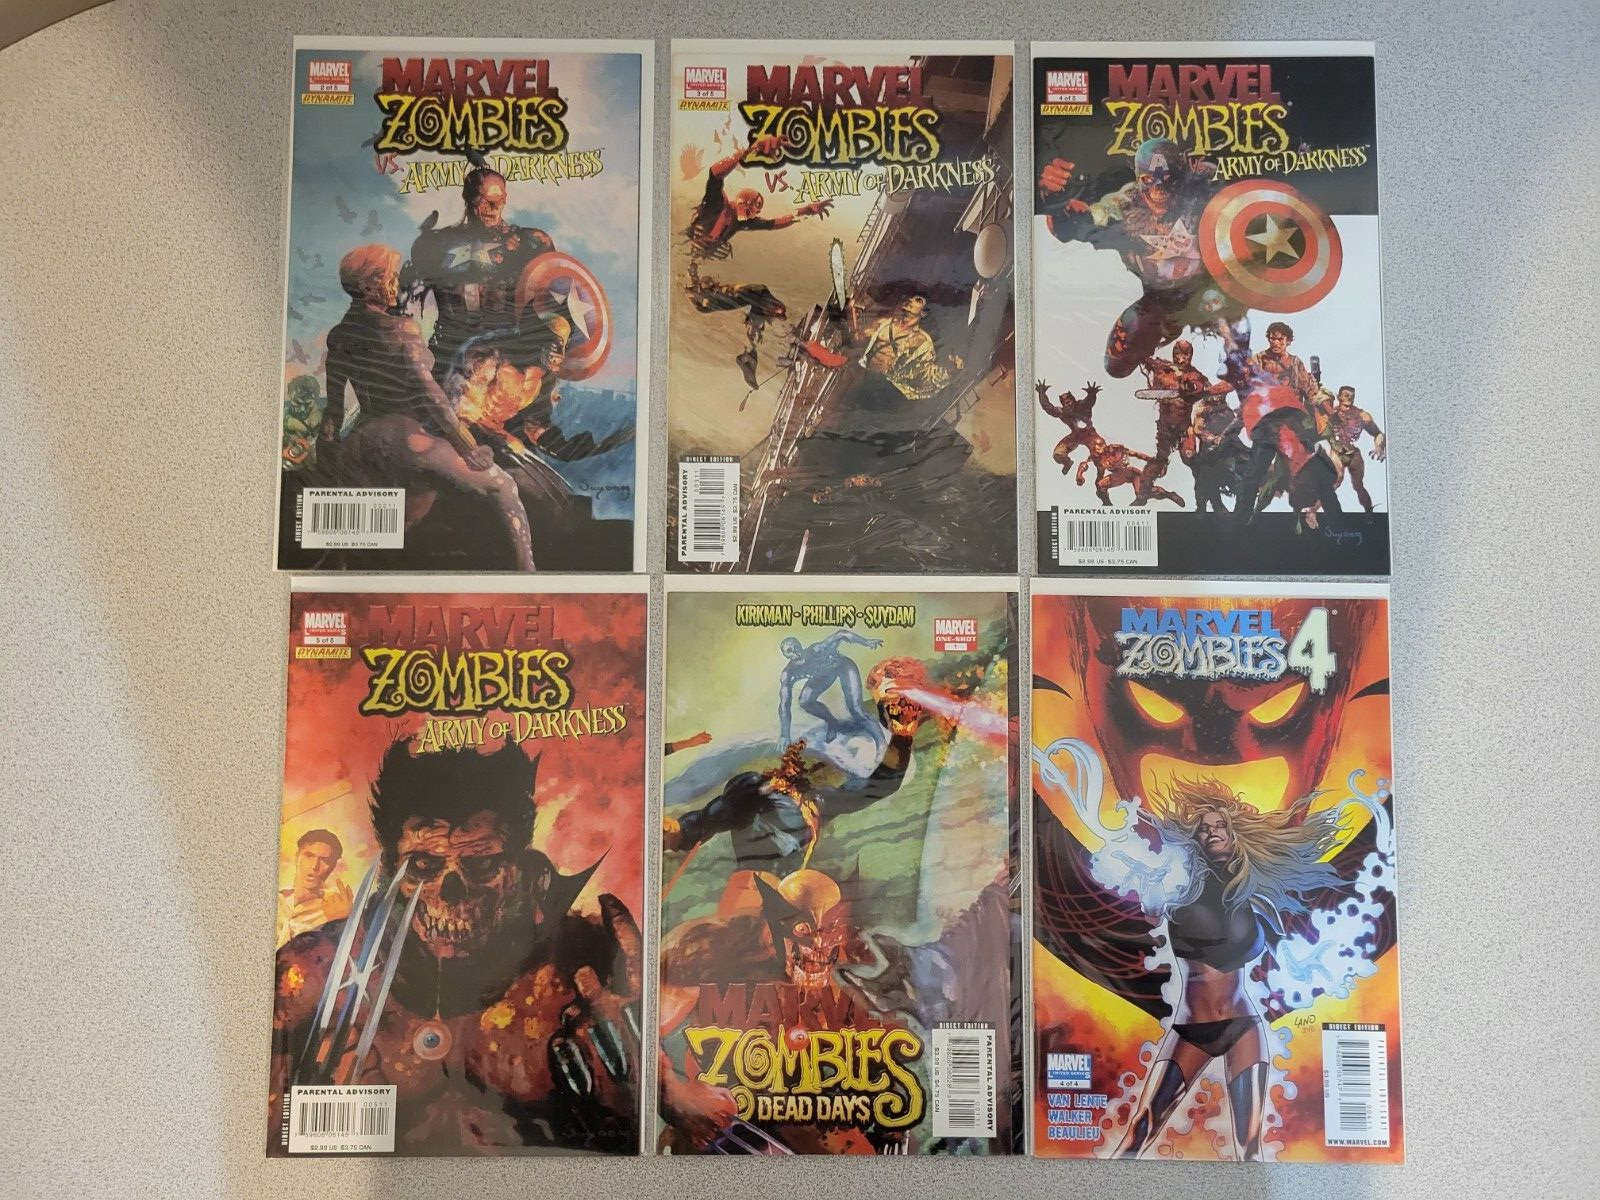 Marvel Zombies Vs. Army of Darkness # 2 3 4 5, Dead Days, Zombies 4 (Lot of 6)